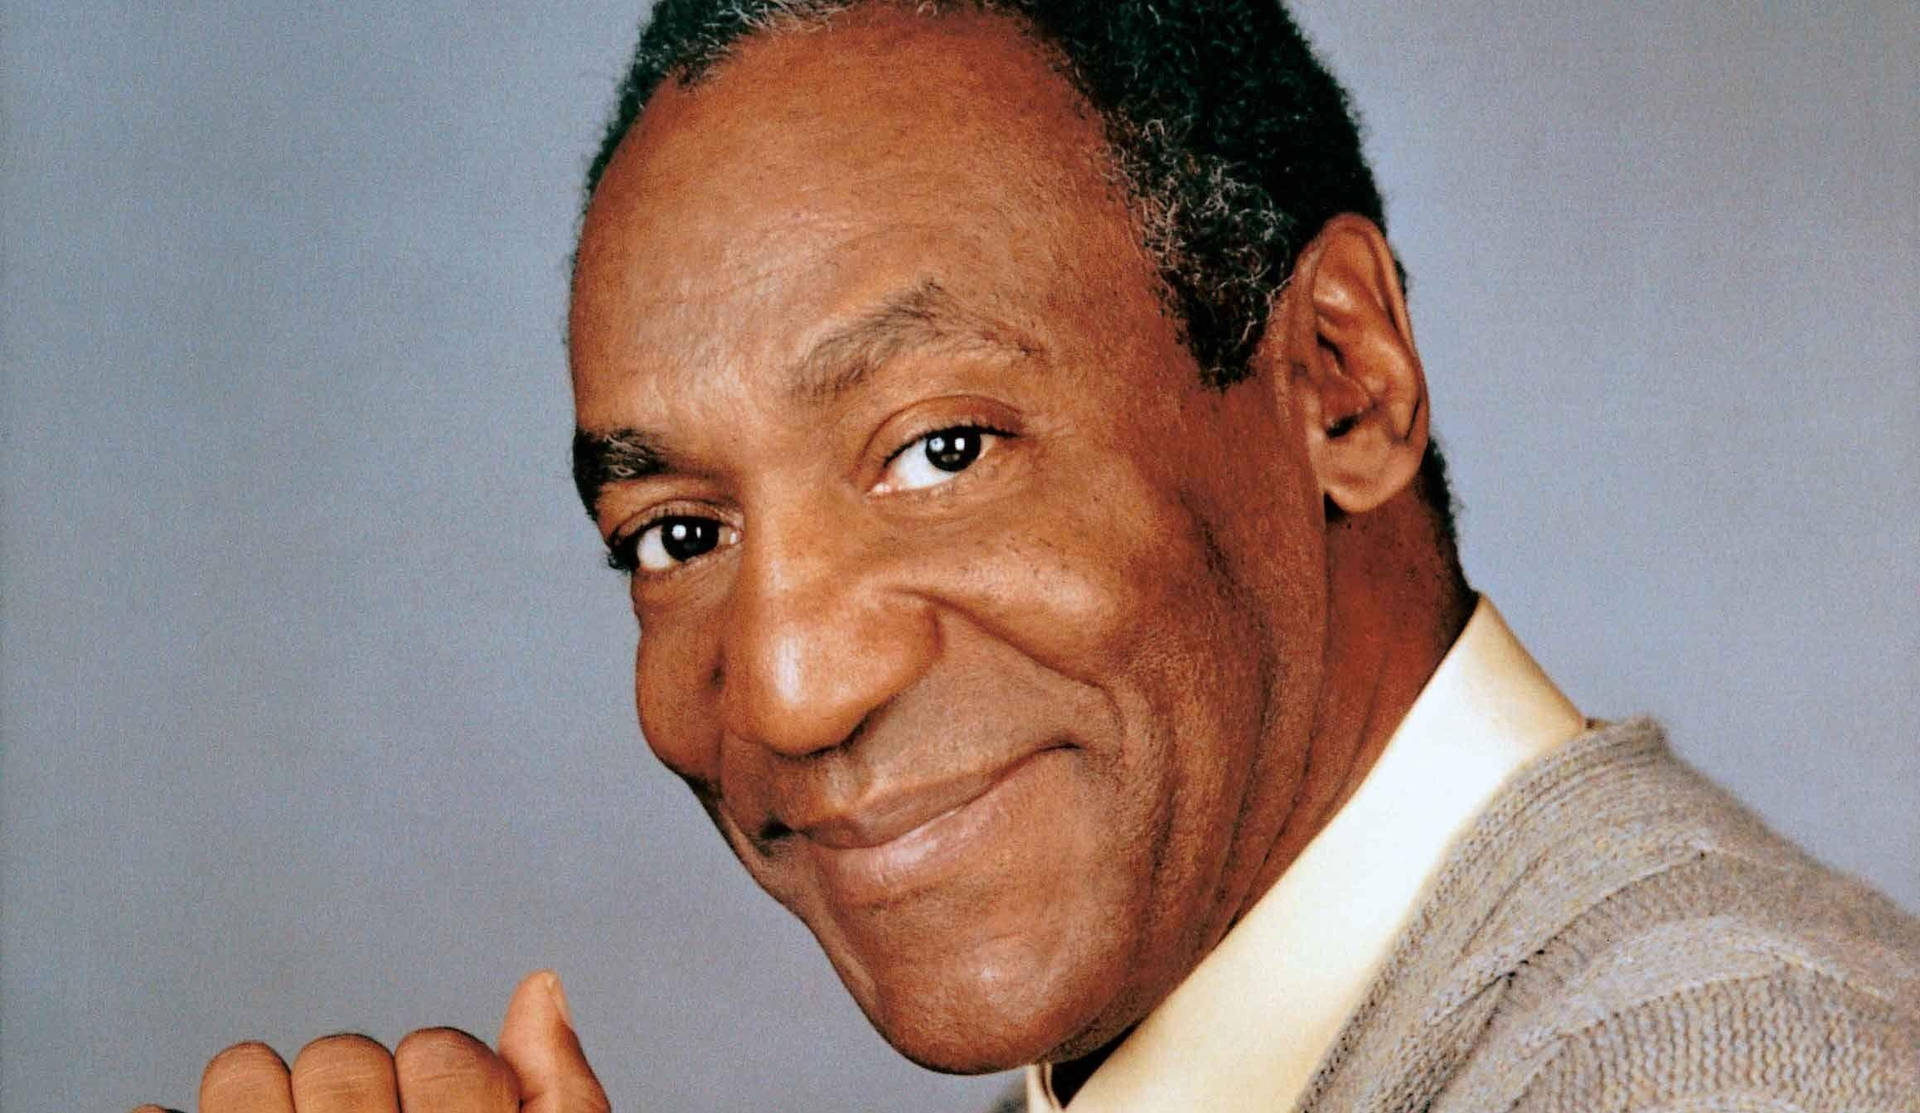 Regning Cosby 2316 X 1343 Wallpaper